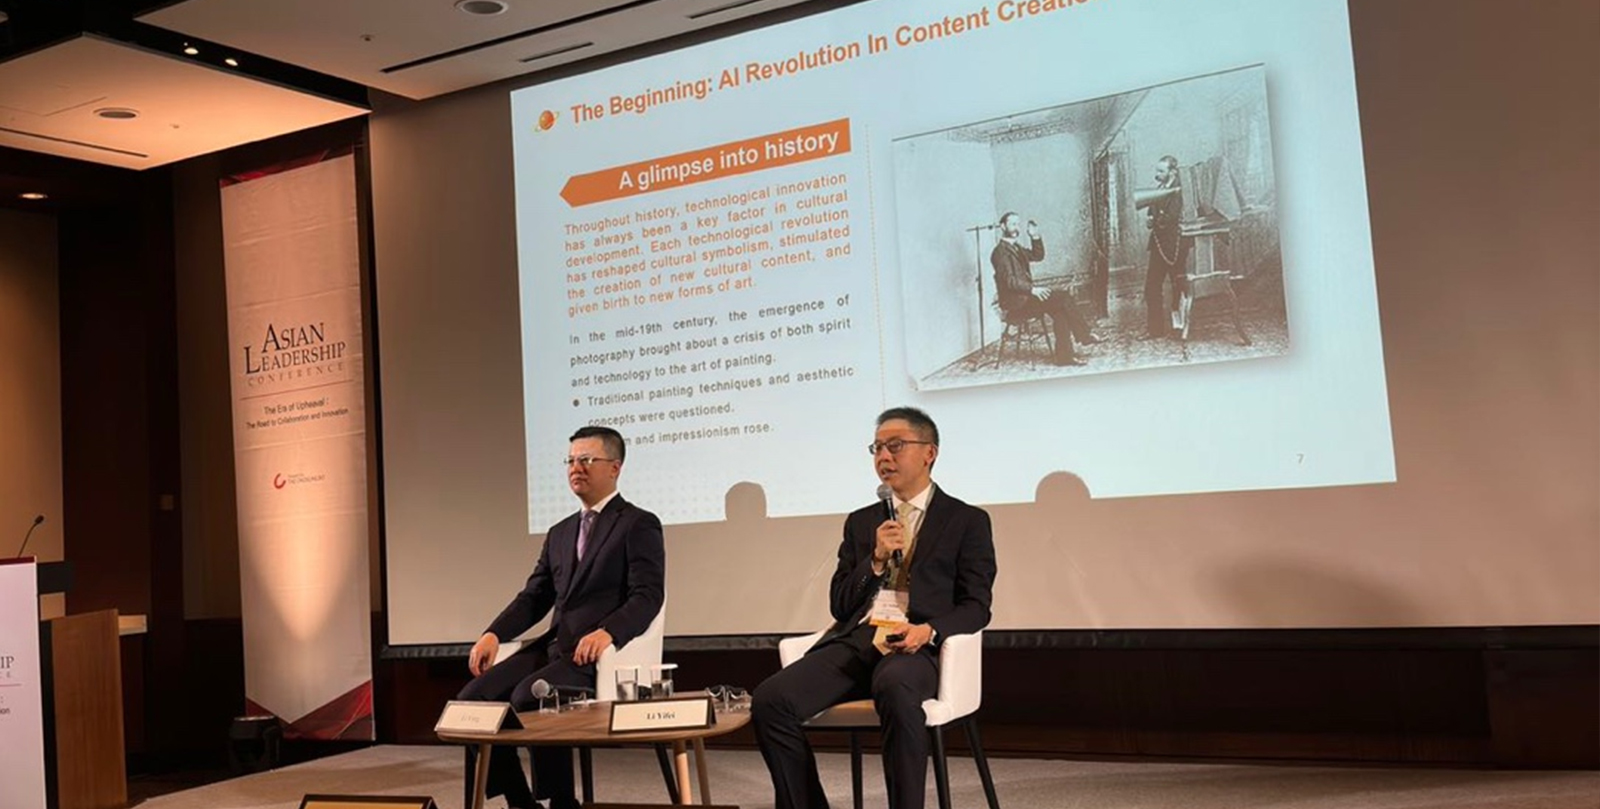 Asian Leadership Conference in Seoul - CKGSB Alumni and Founder and Chairman of 37 Interactive Entertainment Network Technology Group Co., Ltd - Li Yifei, delivered a captivating presentation